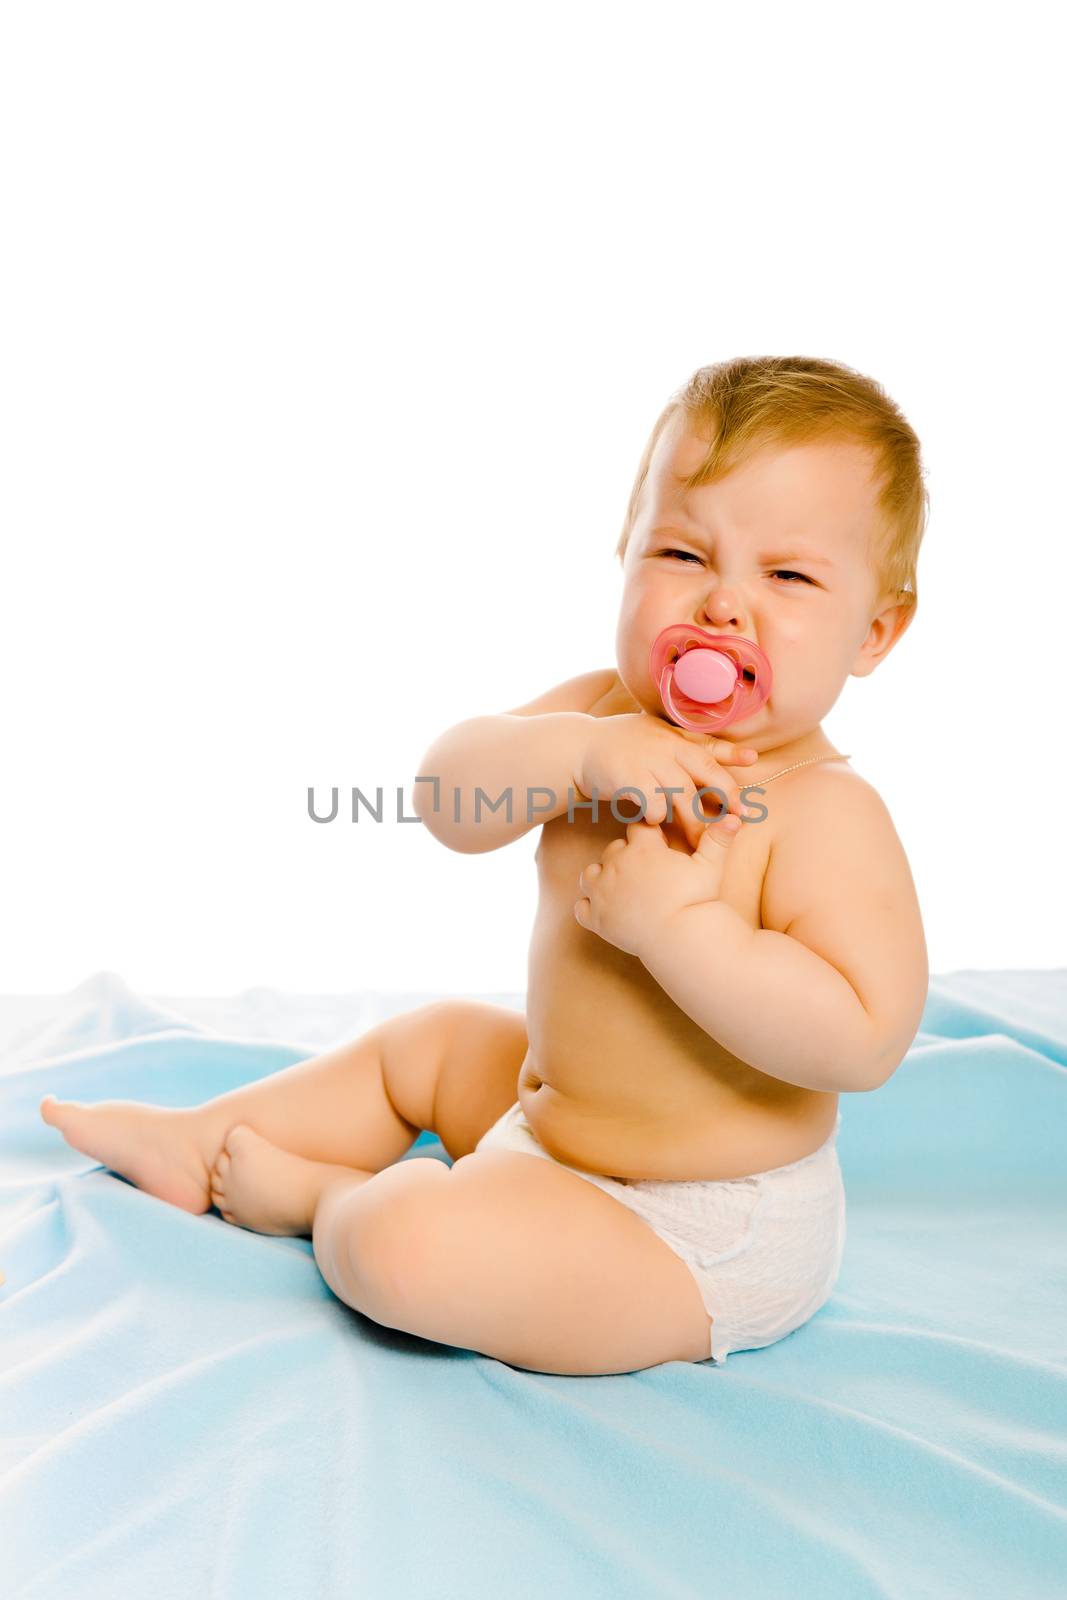 upset baby in diapers on a blue coverlet. Studio